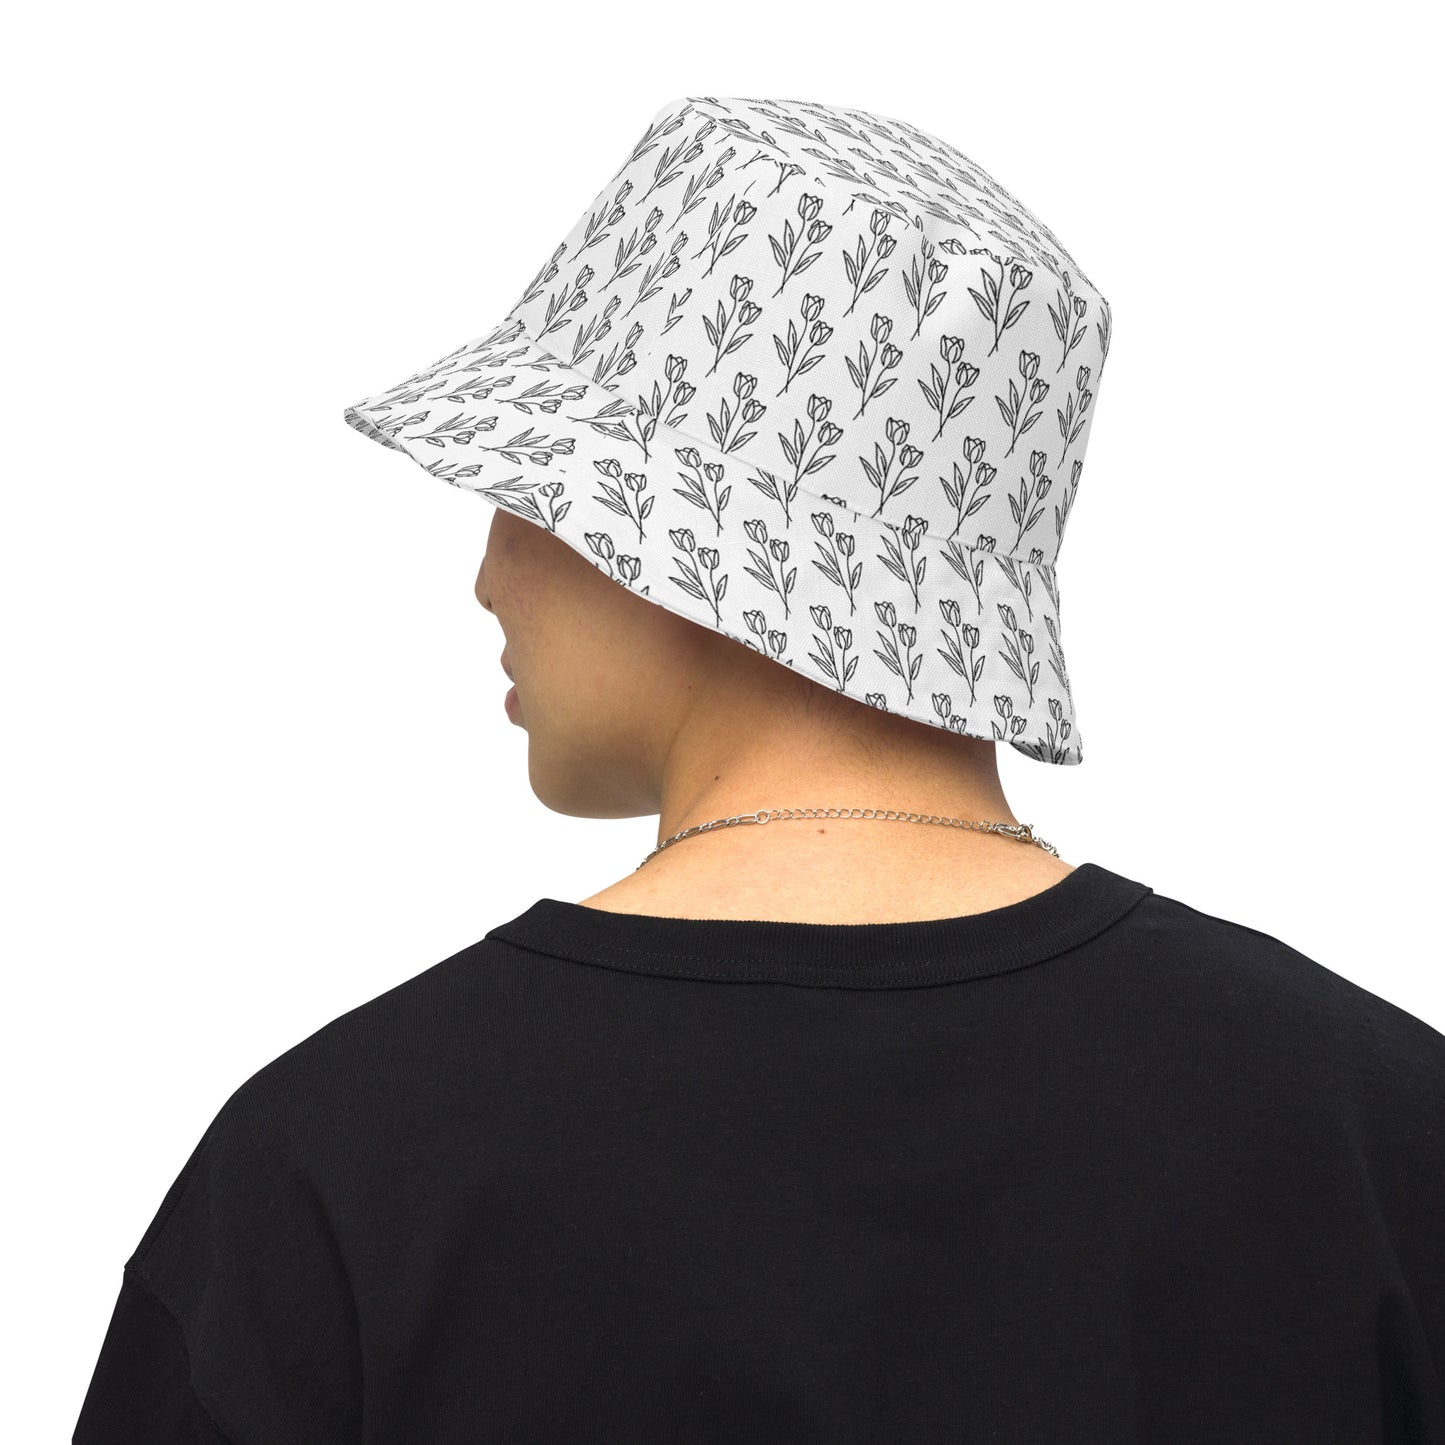 Reversible bucket hat with a black tulip tattoo